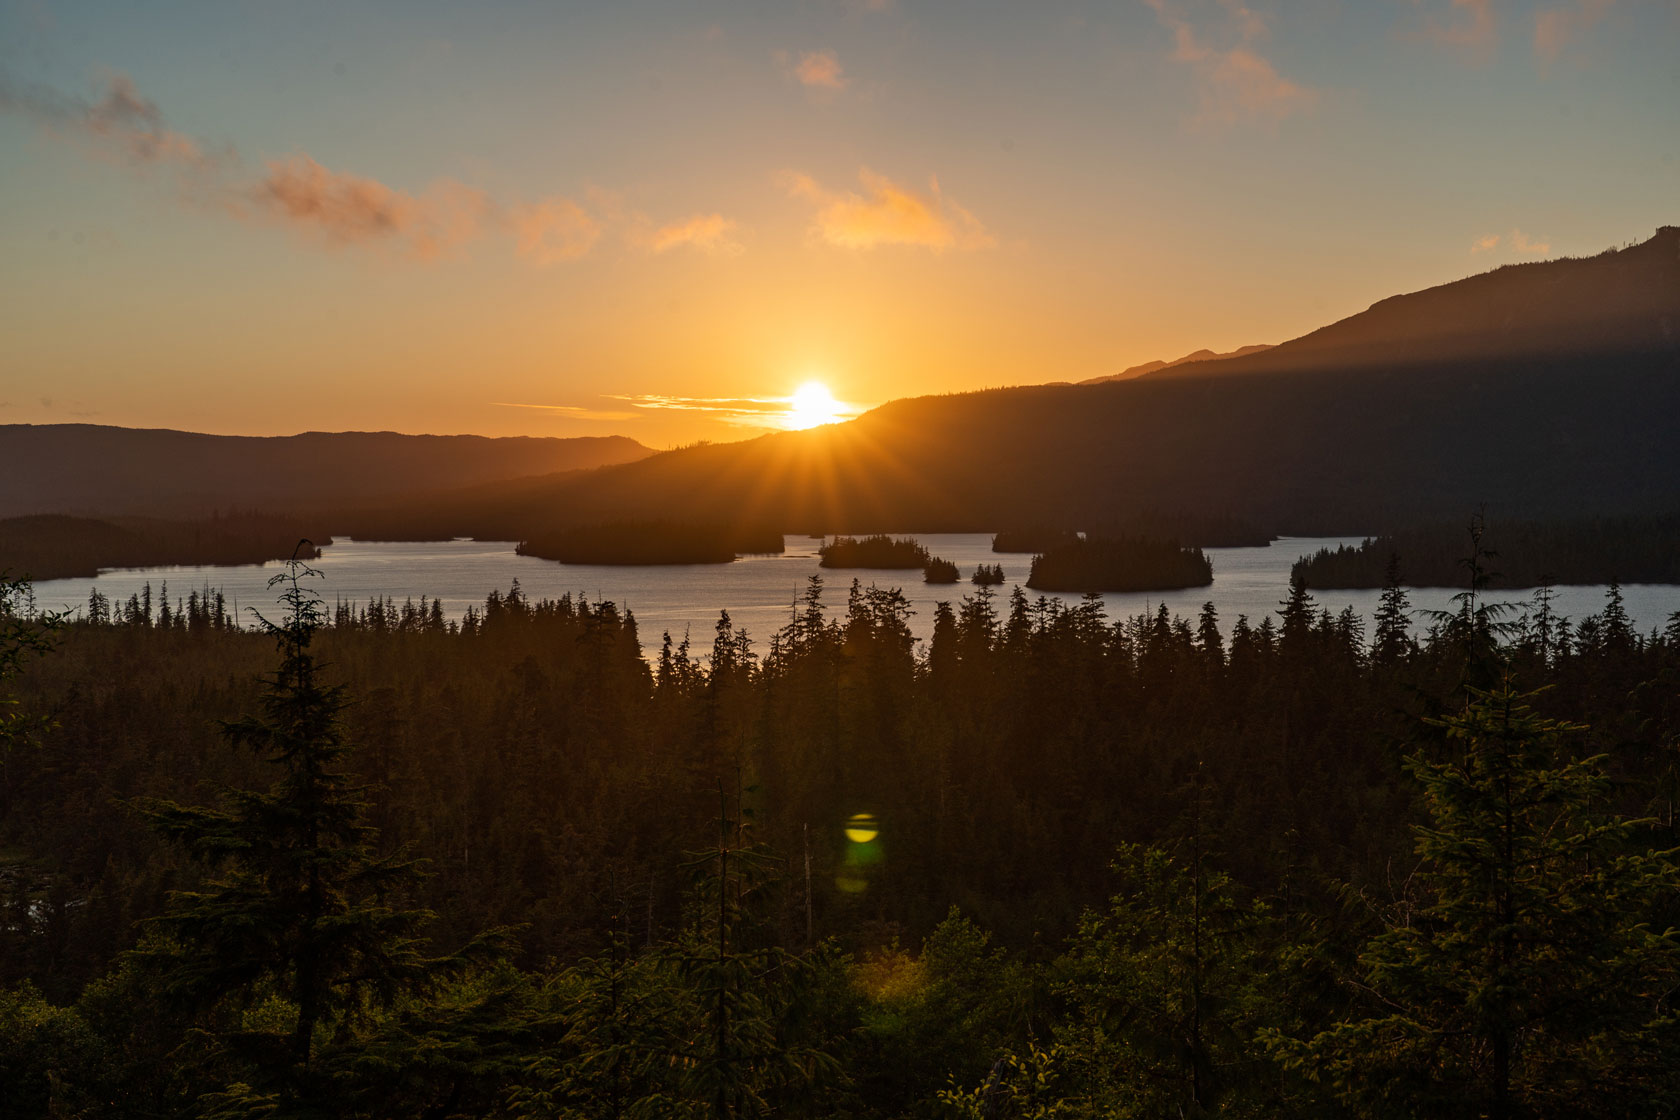 Image showing a sunset in Tongass National Forest, with the sun setting behind some hills in the background, and pine trees populating small islands in the foreground.